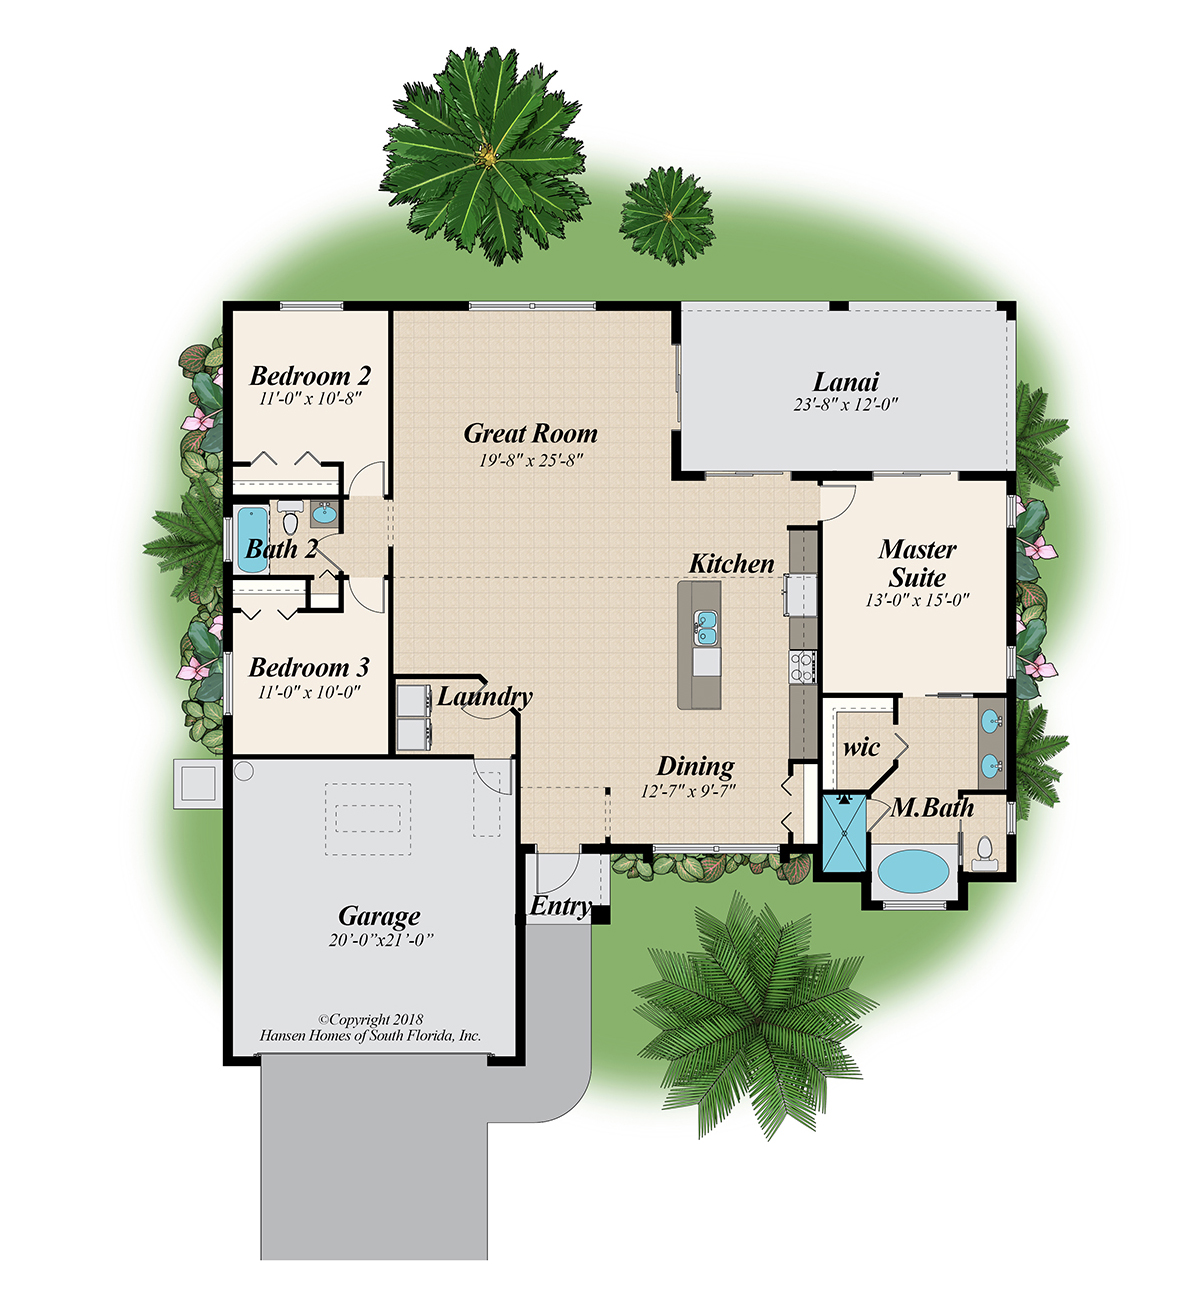 The More Home Plan Floor Plans